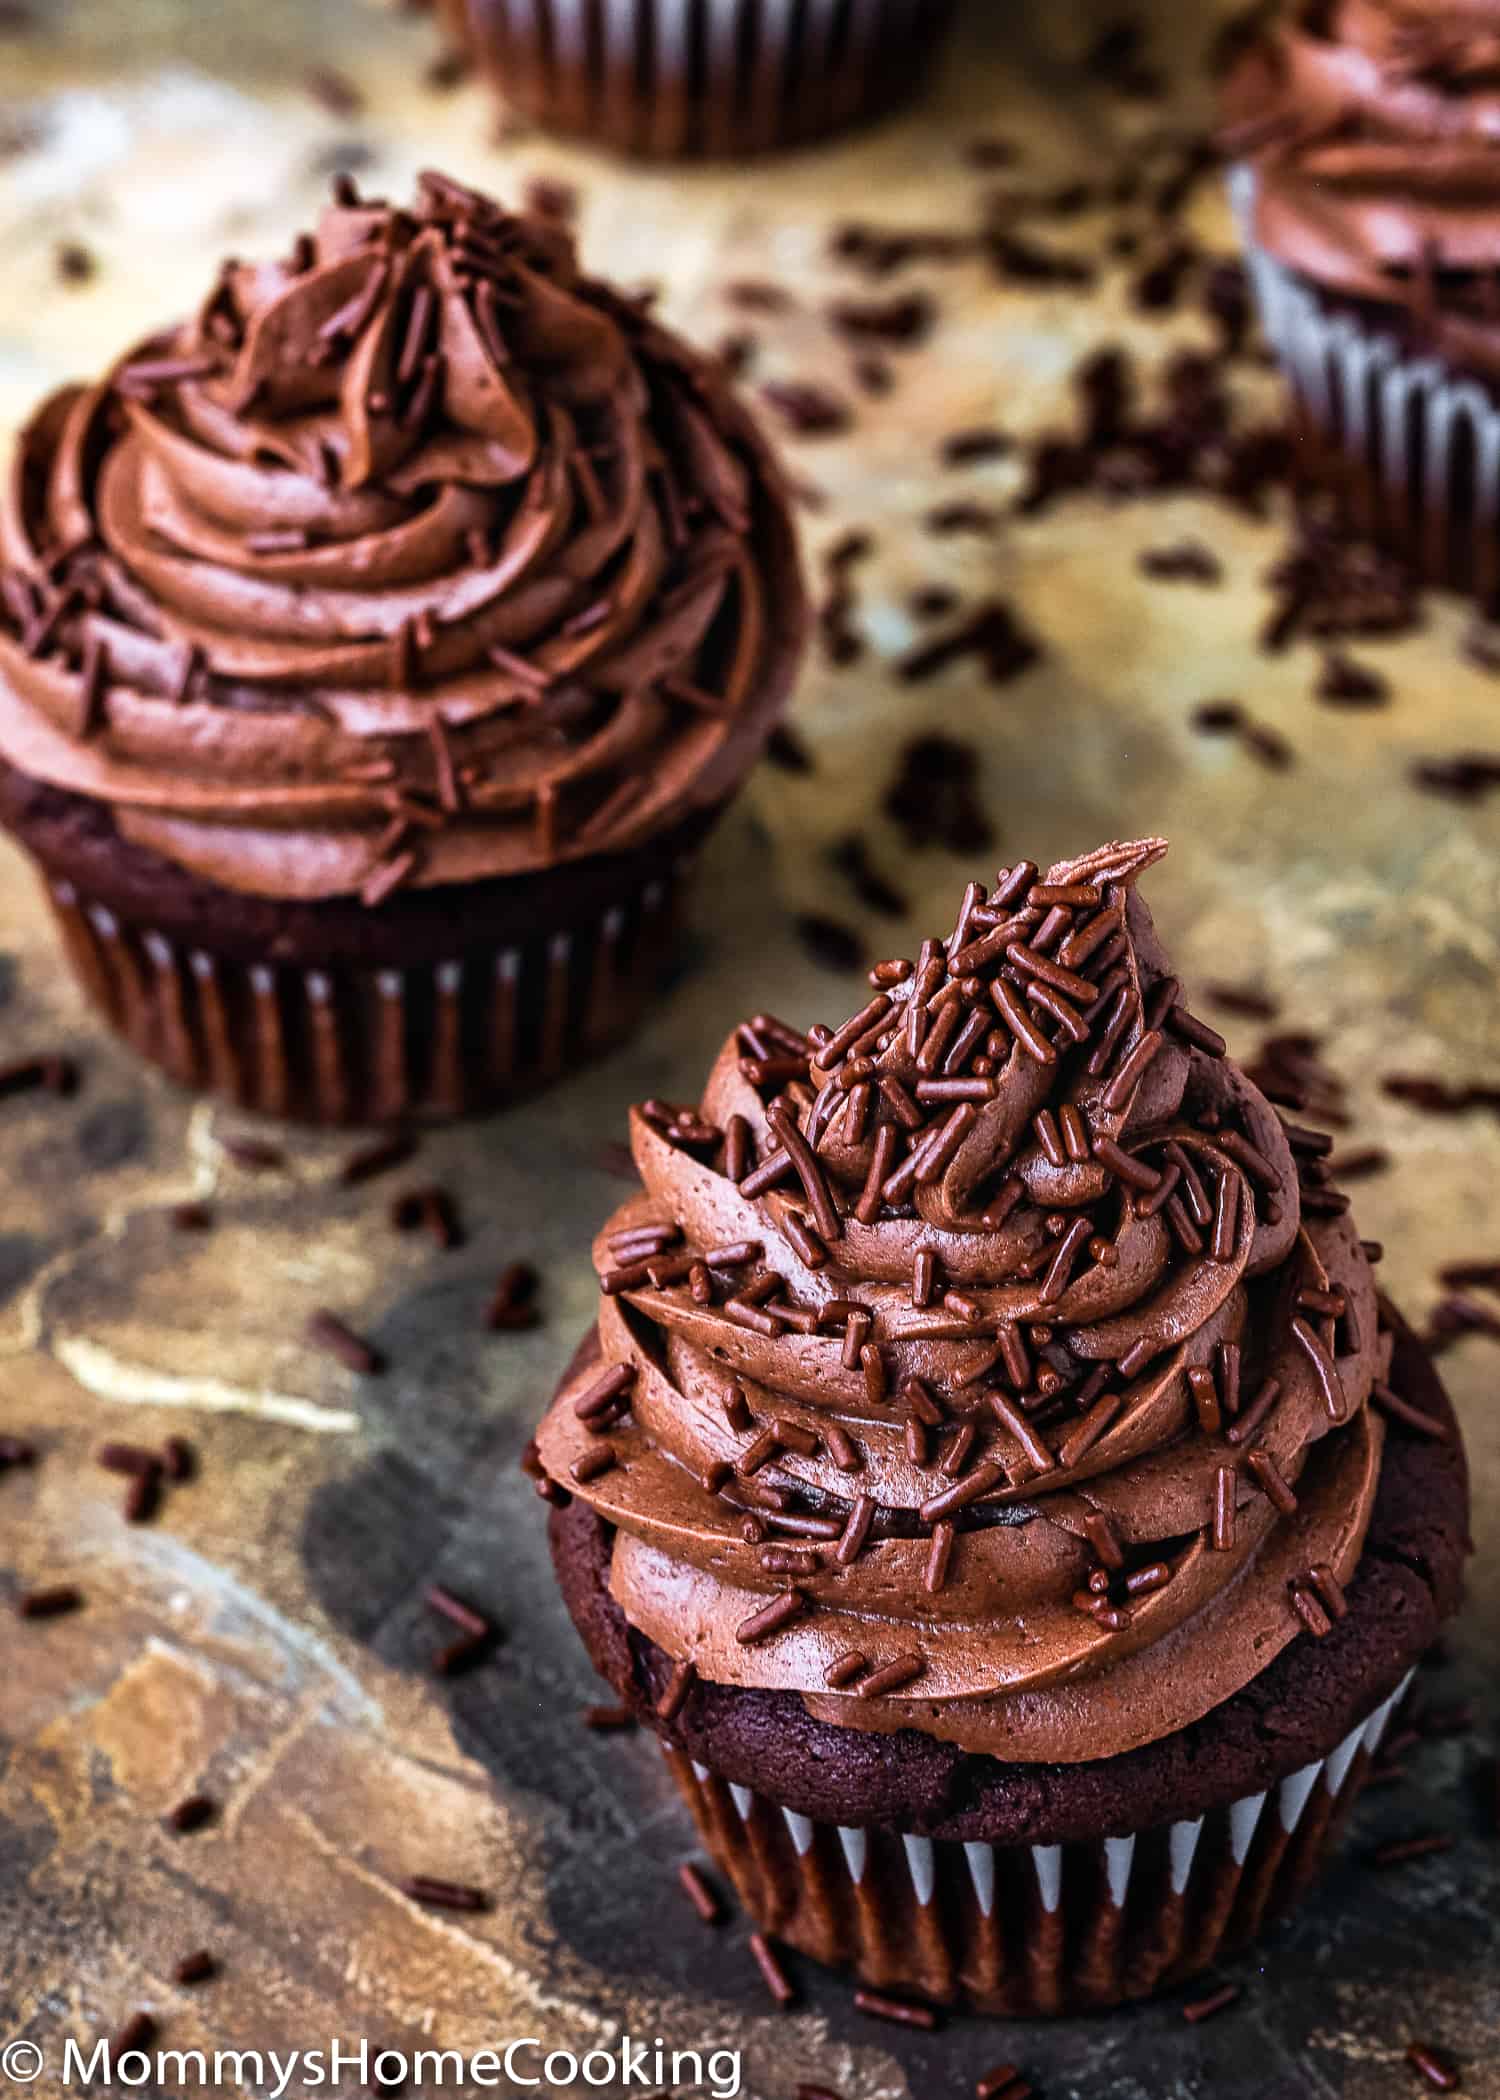 Eggless chocolate cupcakes with chocolate frosting and sprinkles.